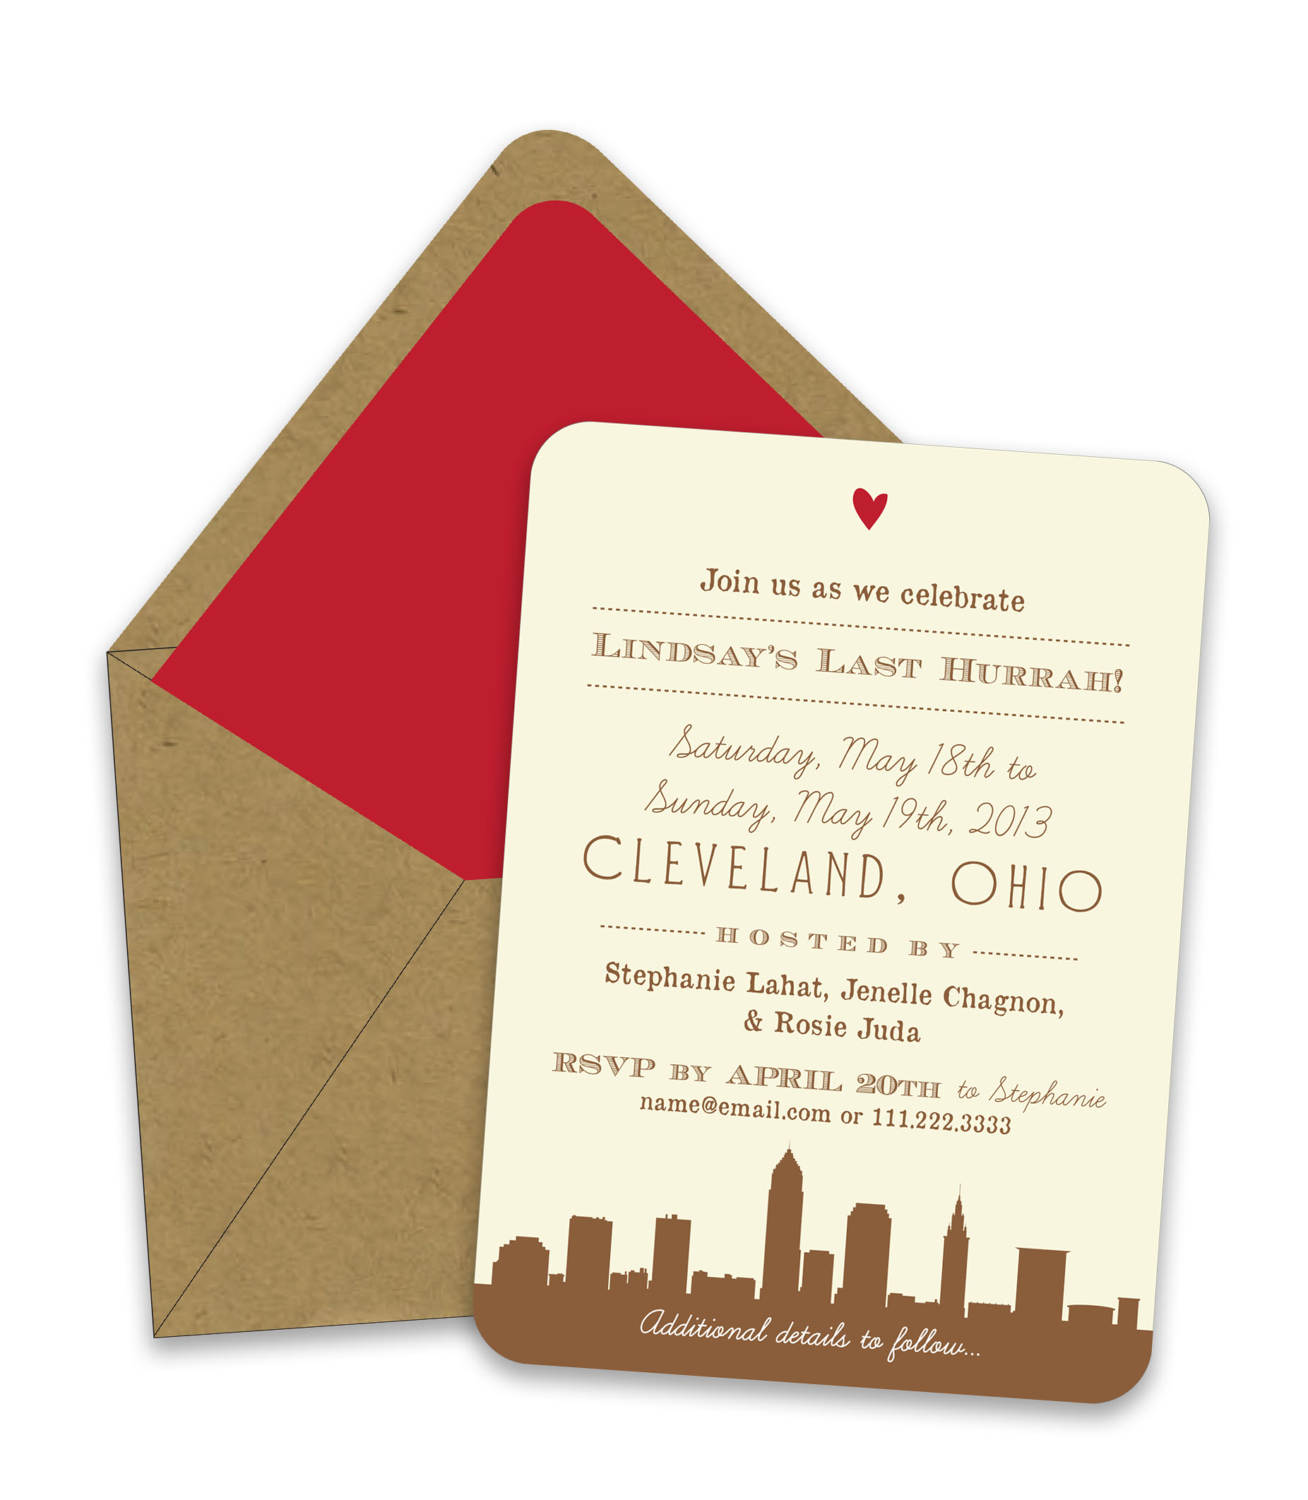 library card save the dates, custom map invitations, wedding invites and more from Foreword Press + Design